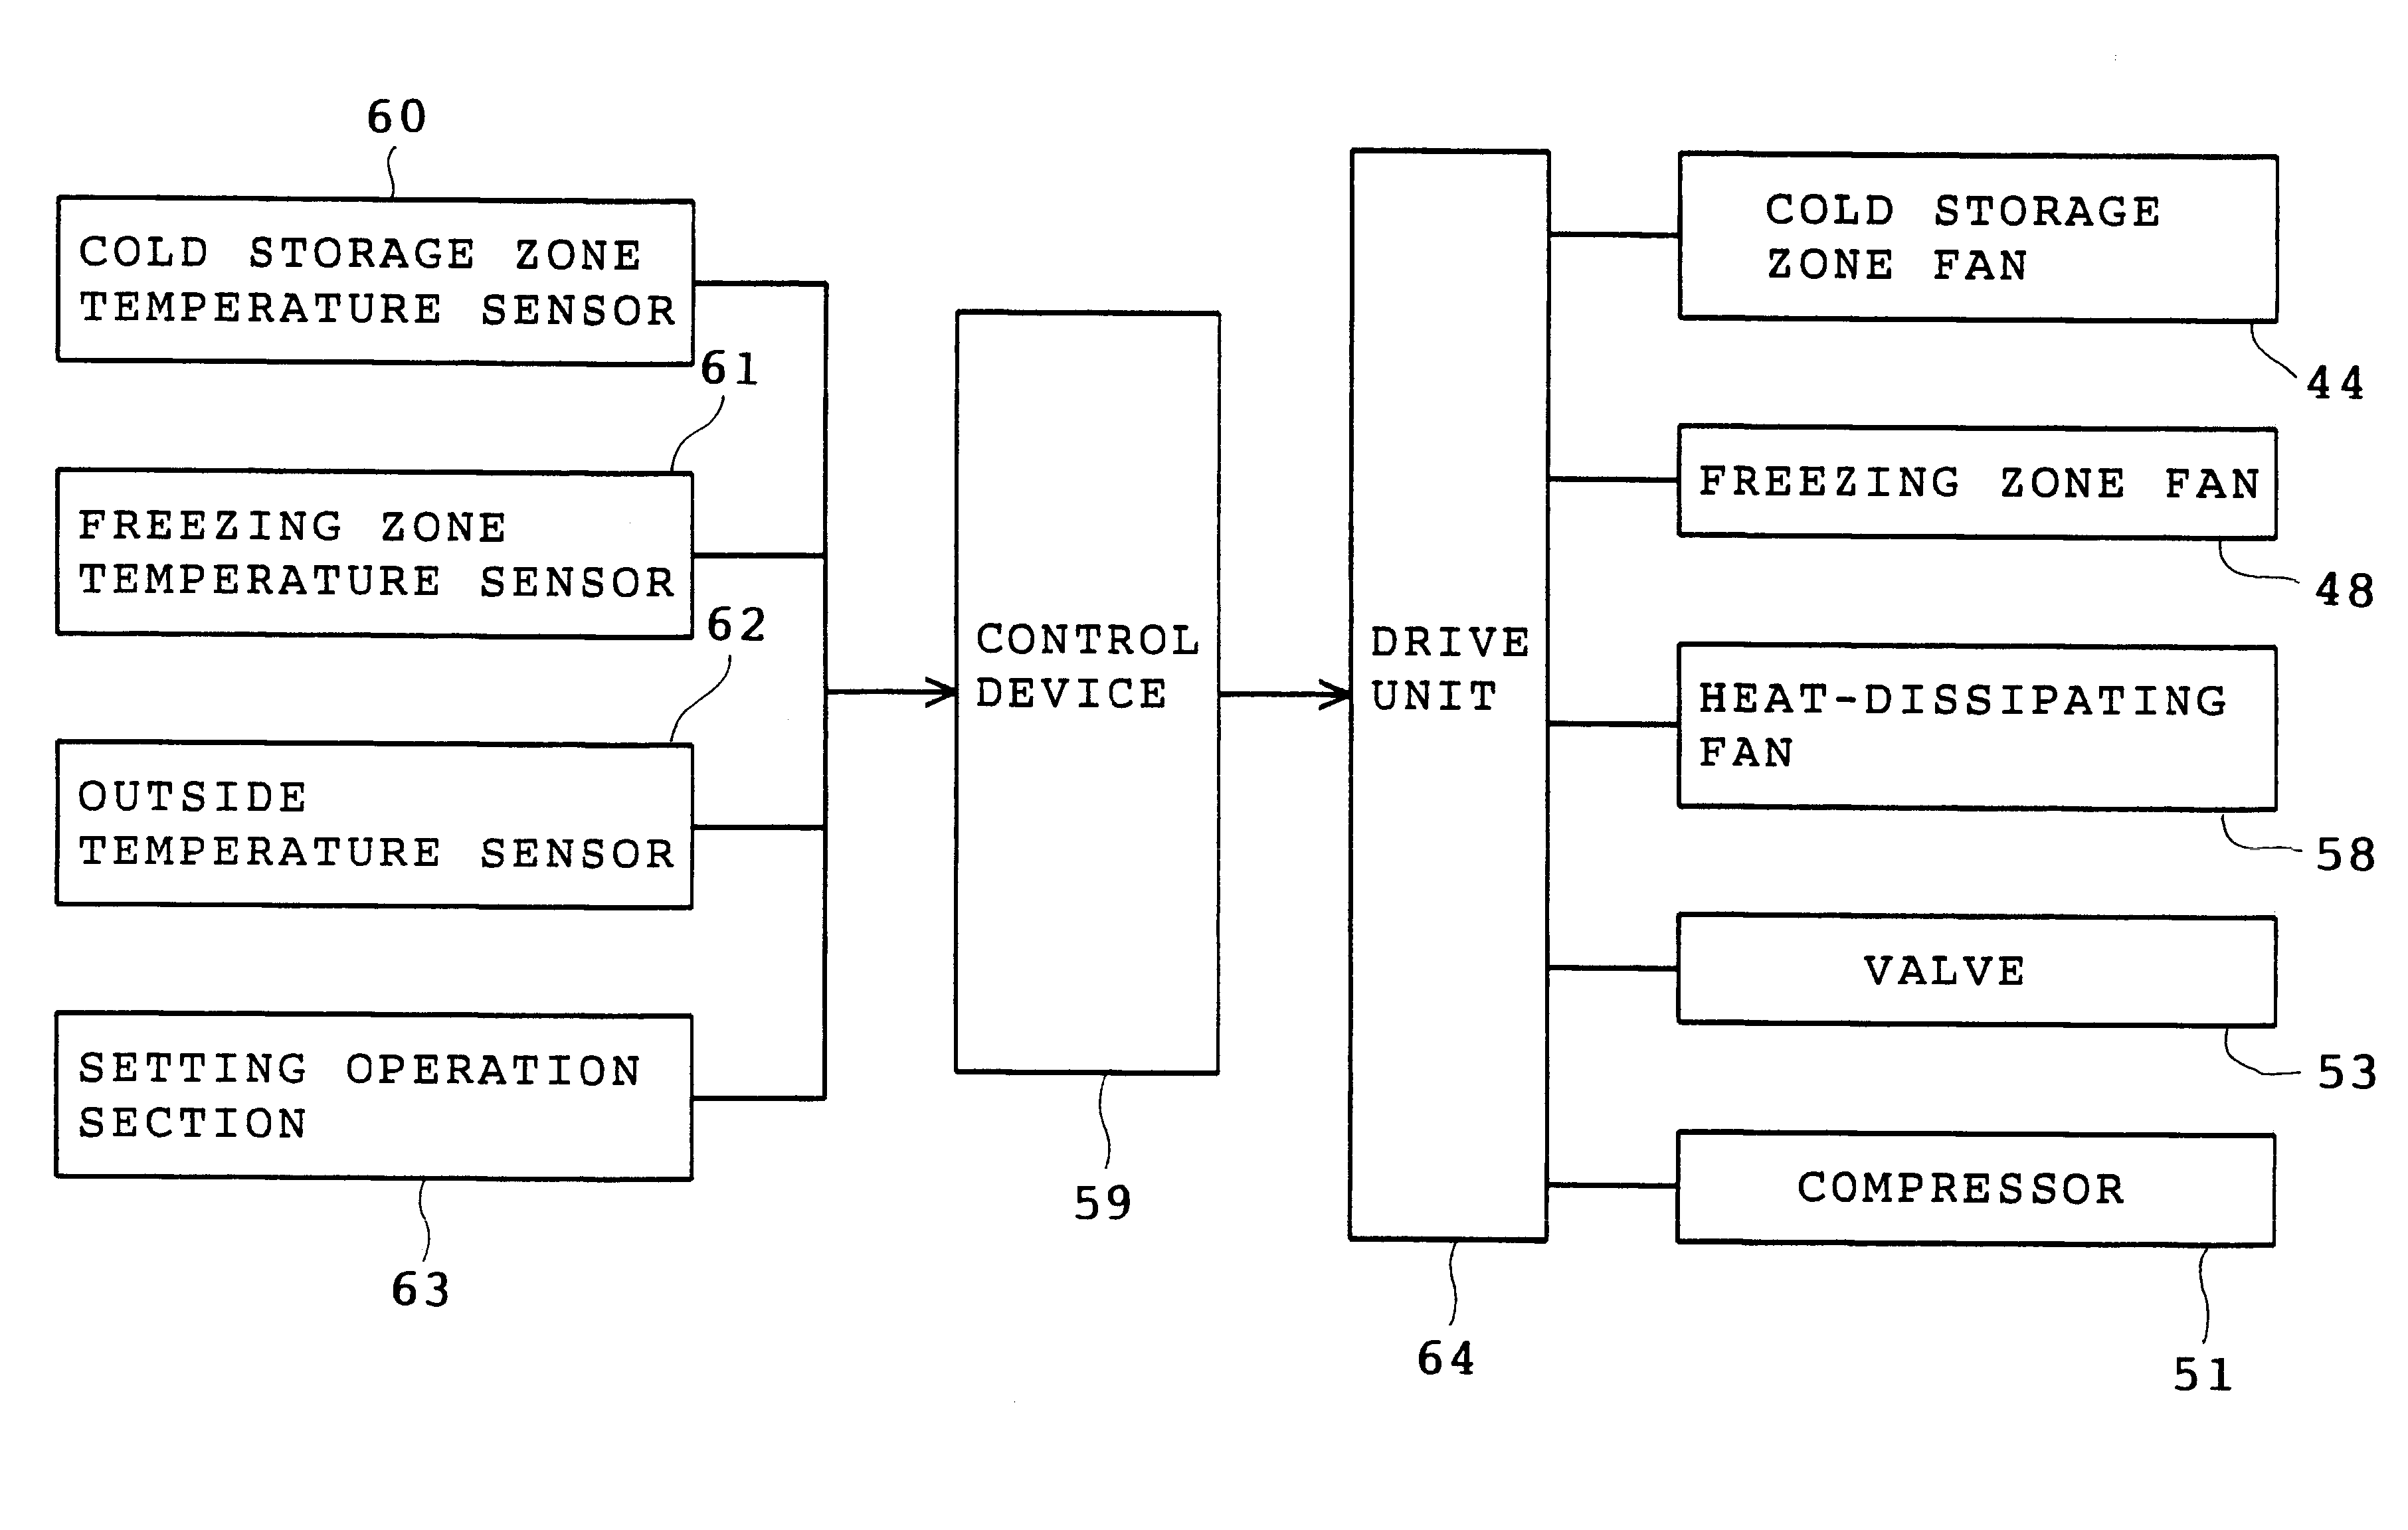 Refrigerator with a plurality of parallel refrigerant passages